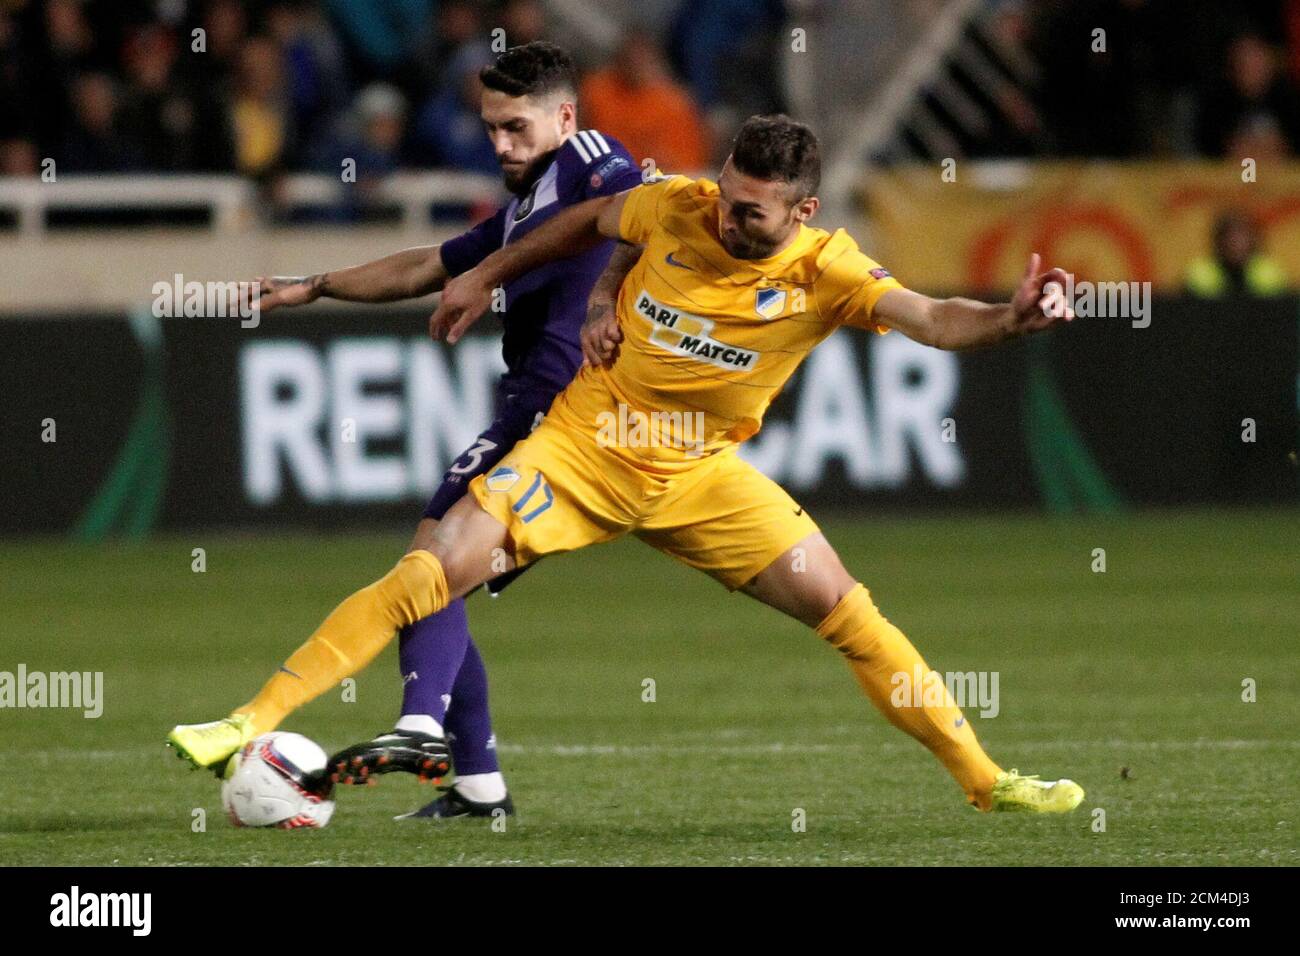 Football Soccer - Europa League - Apoel FC vs Anderlecht - Round of 16 First Leg - Gsp stadium, Nicosia, Cyprus - 09/03/2017. David Barral  of Apoel FC and Nicolae Stanciu of Anderlecht in action. REUTERS/Yiannis Kourtoglou Stock Photo